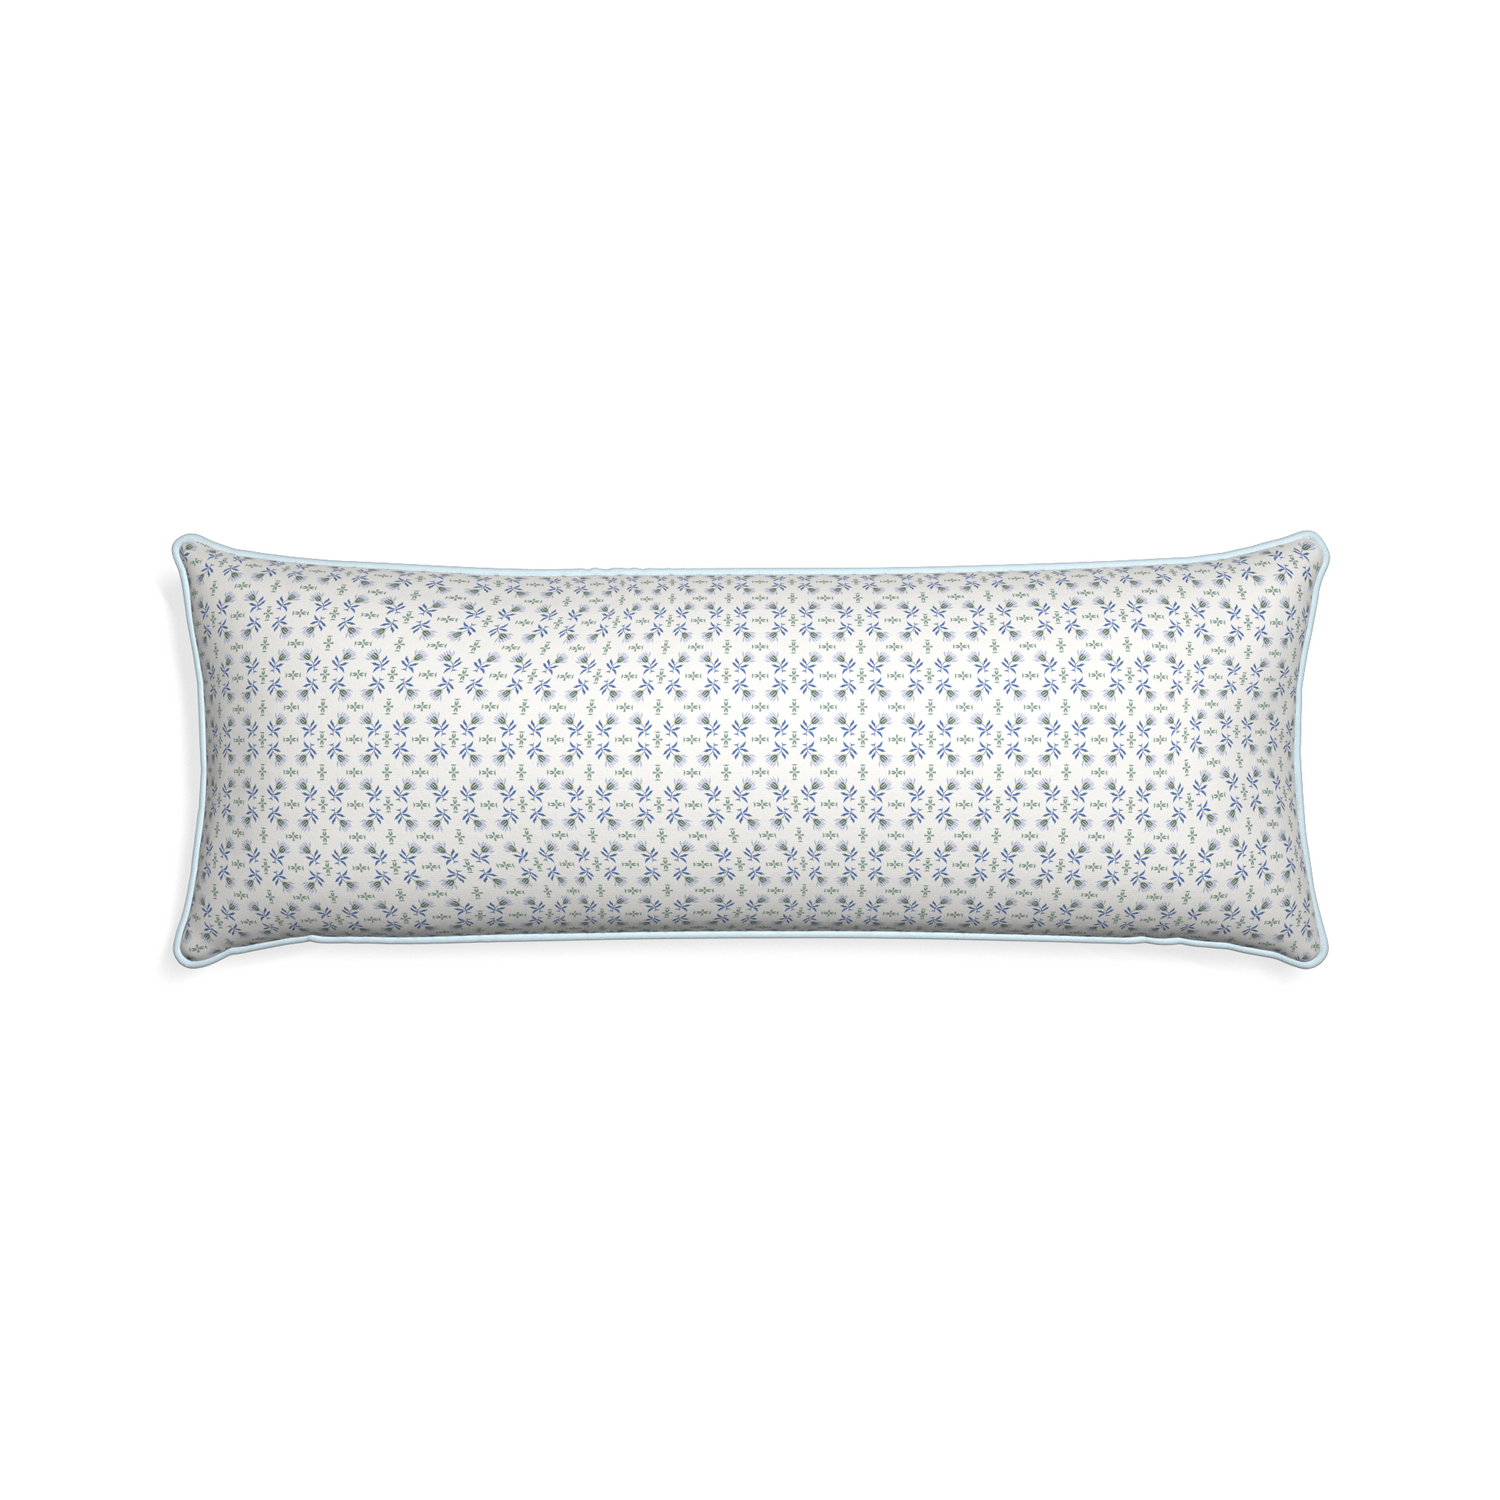 Xl-lumbar lee custom pillow with powder piping on white background